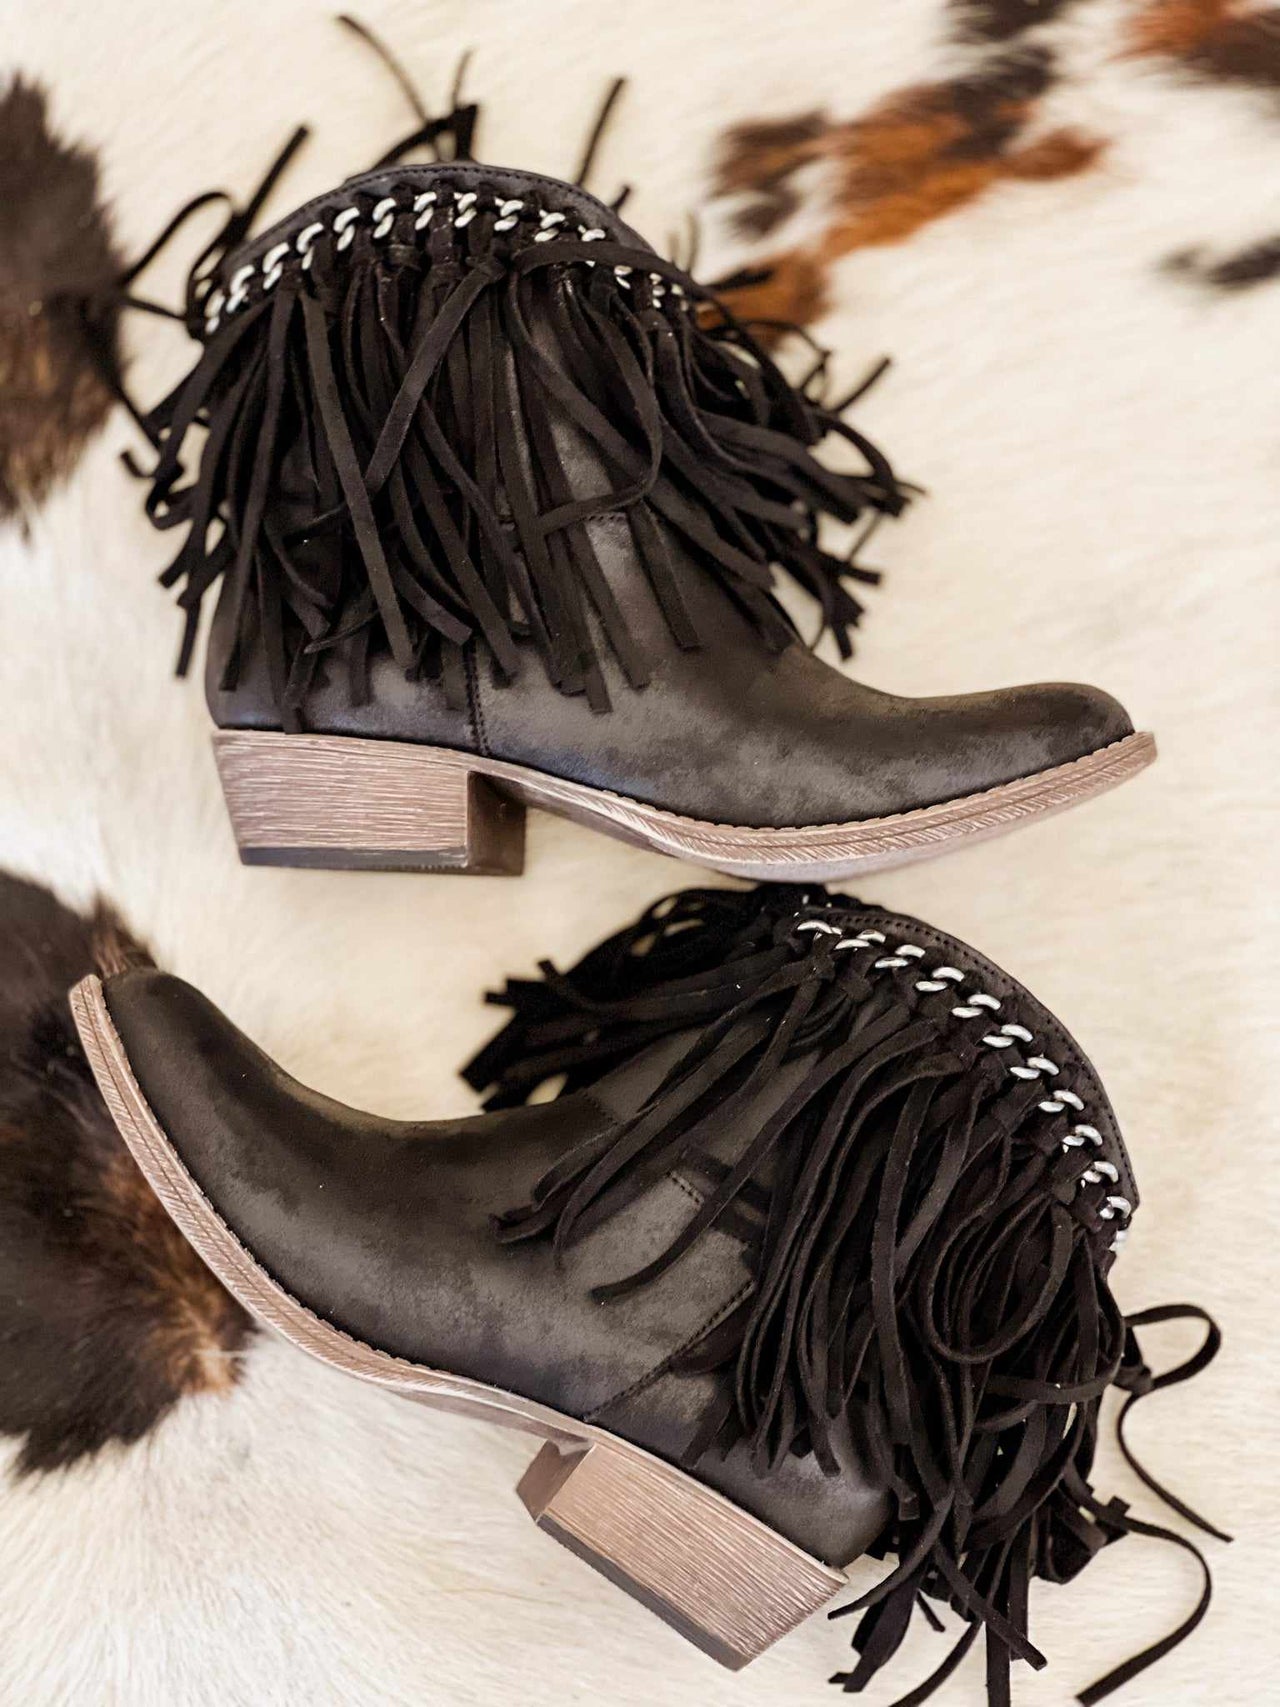 Black ankle boots with fringe.